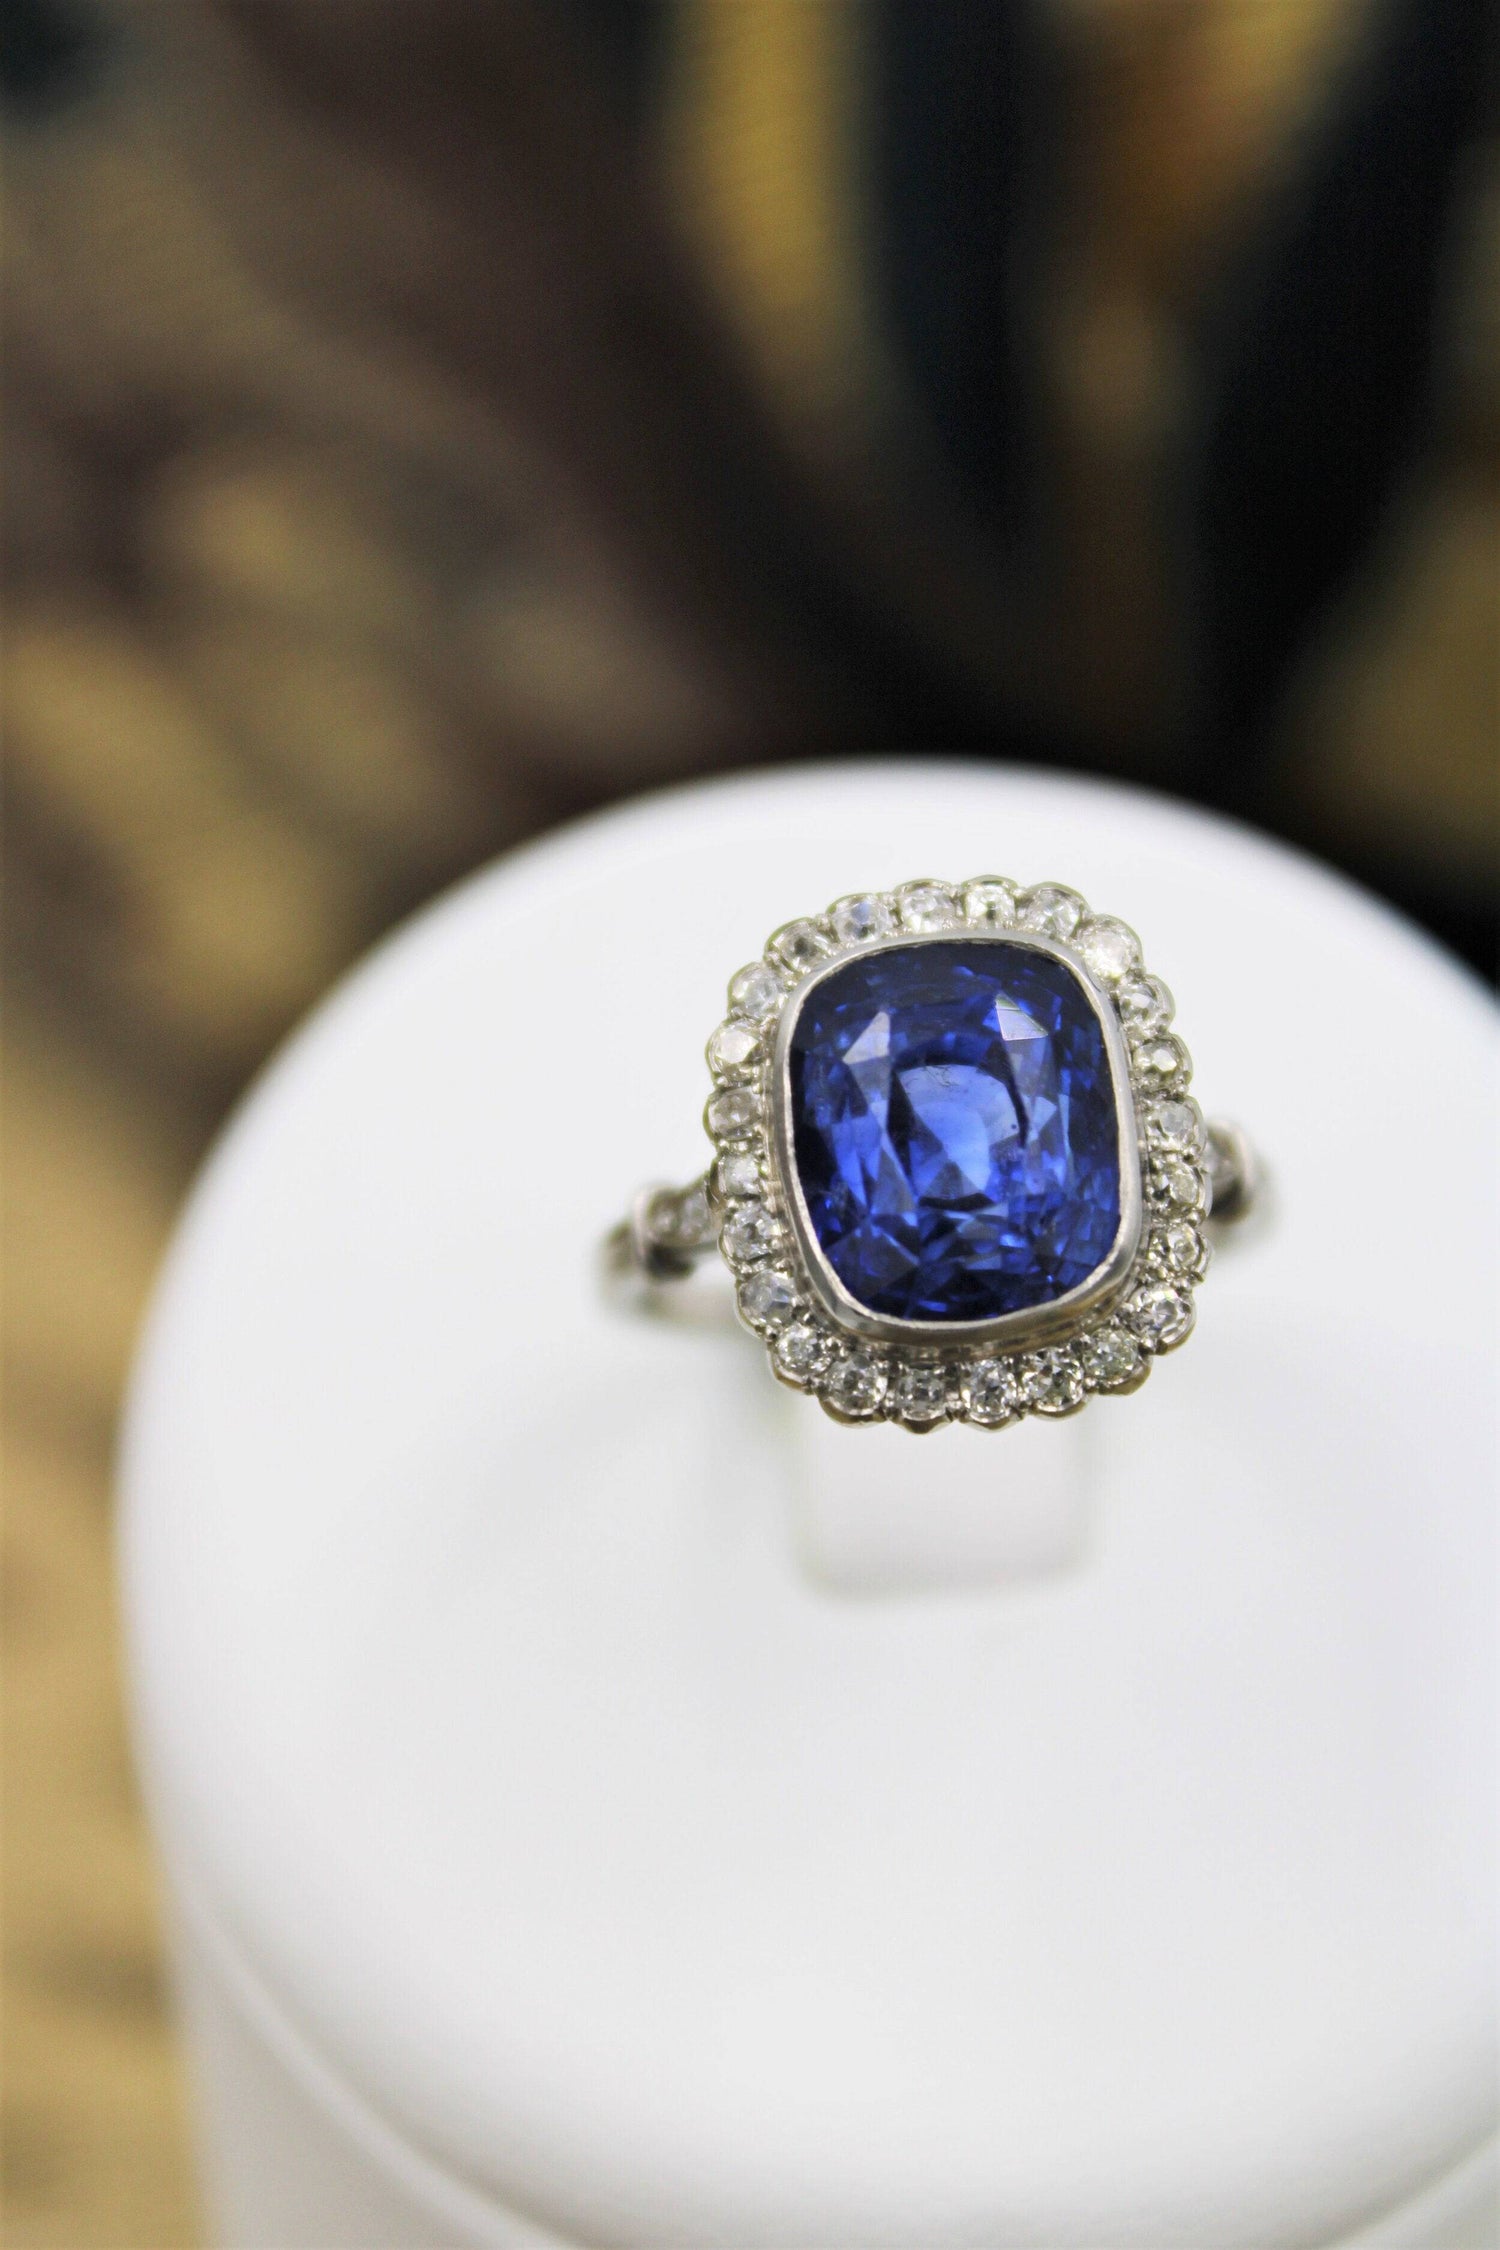 An exquisite 8.10ct Natural Untreated Ceylon Sapphire and Diamond Cluster Ring mounted in Platinum, English, Circa 1925 - Robin Haydock Antiques